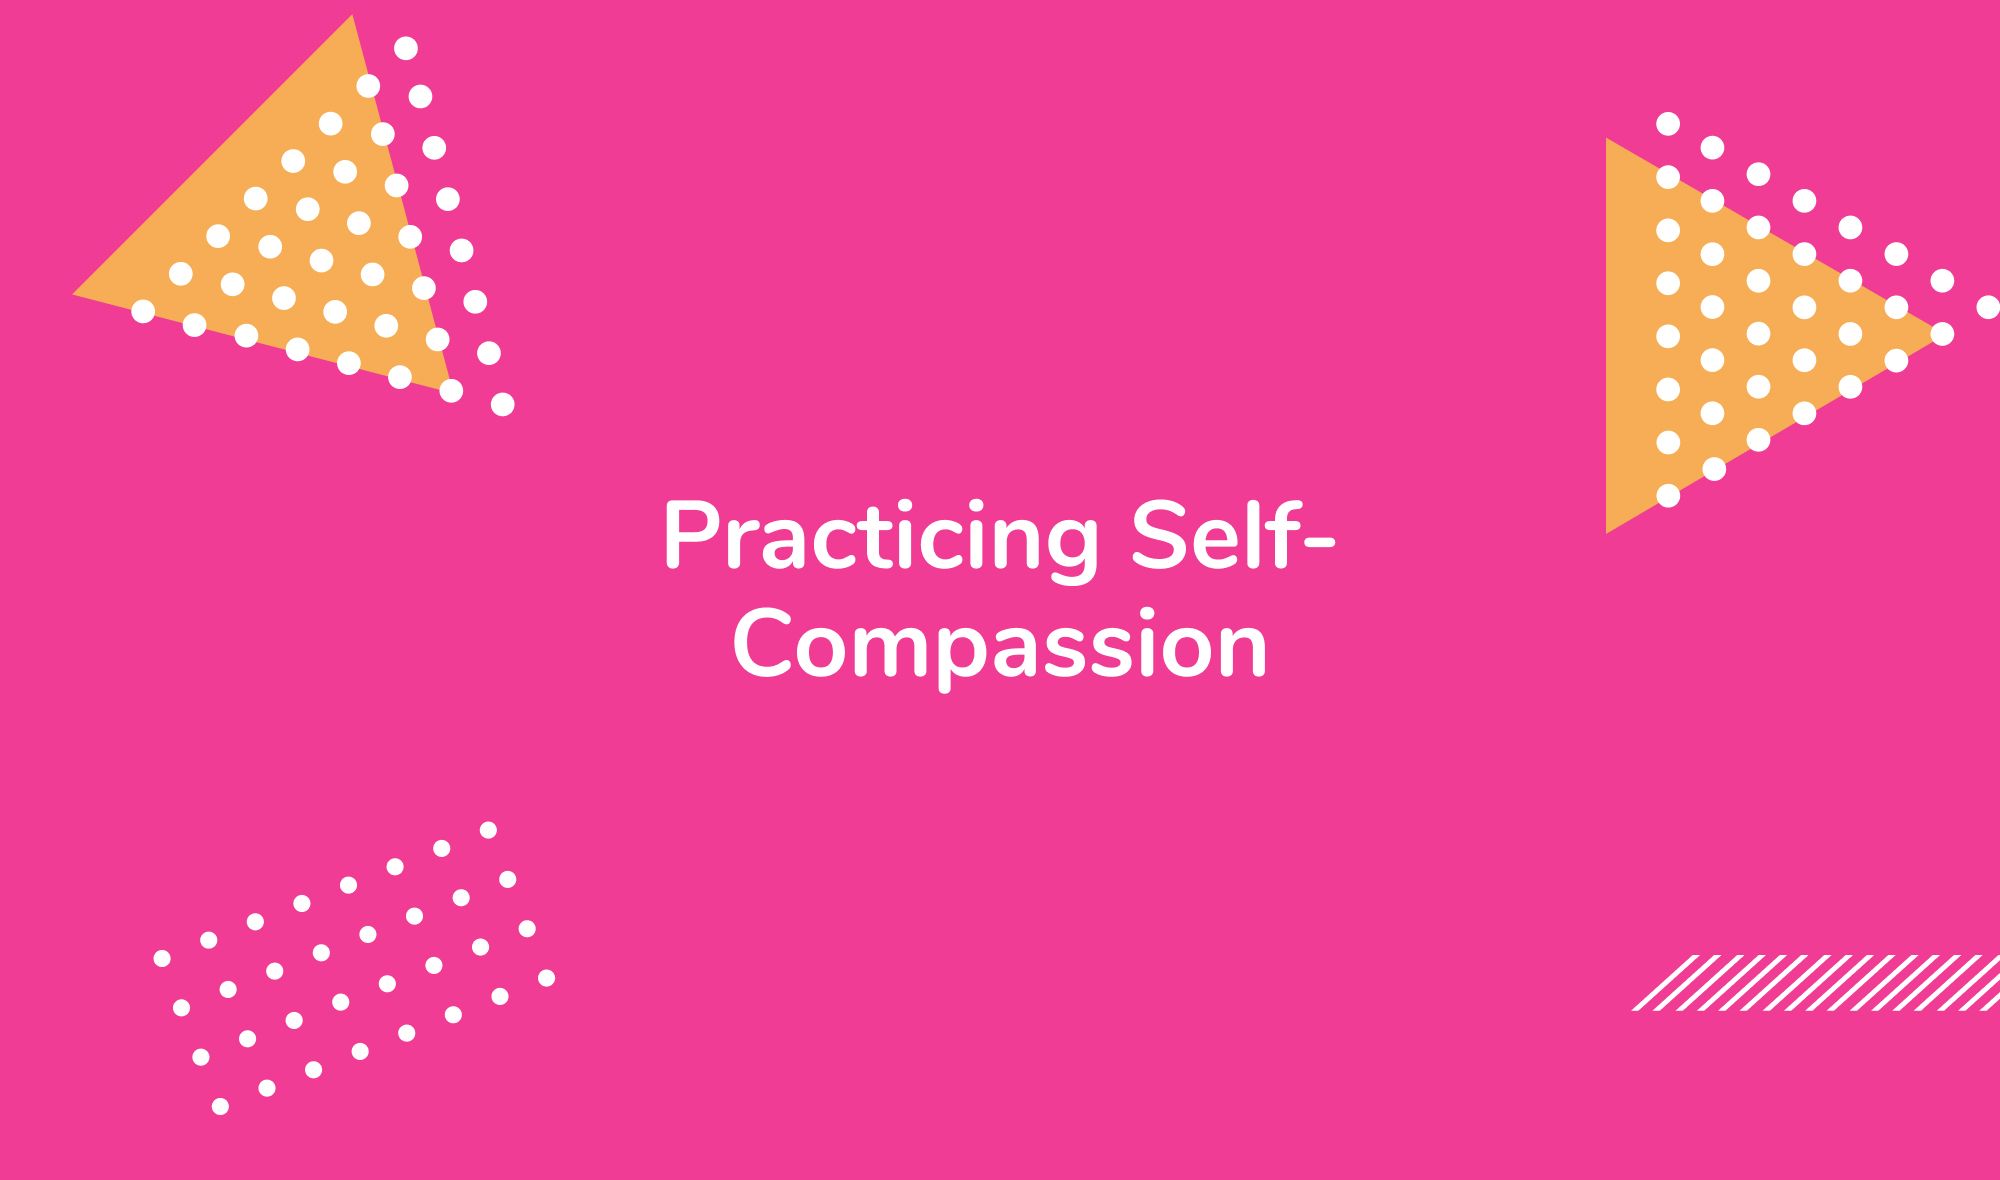 Practicing Self-Compassion to Alleviate Self-Doubt